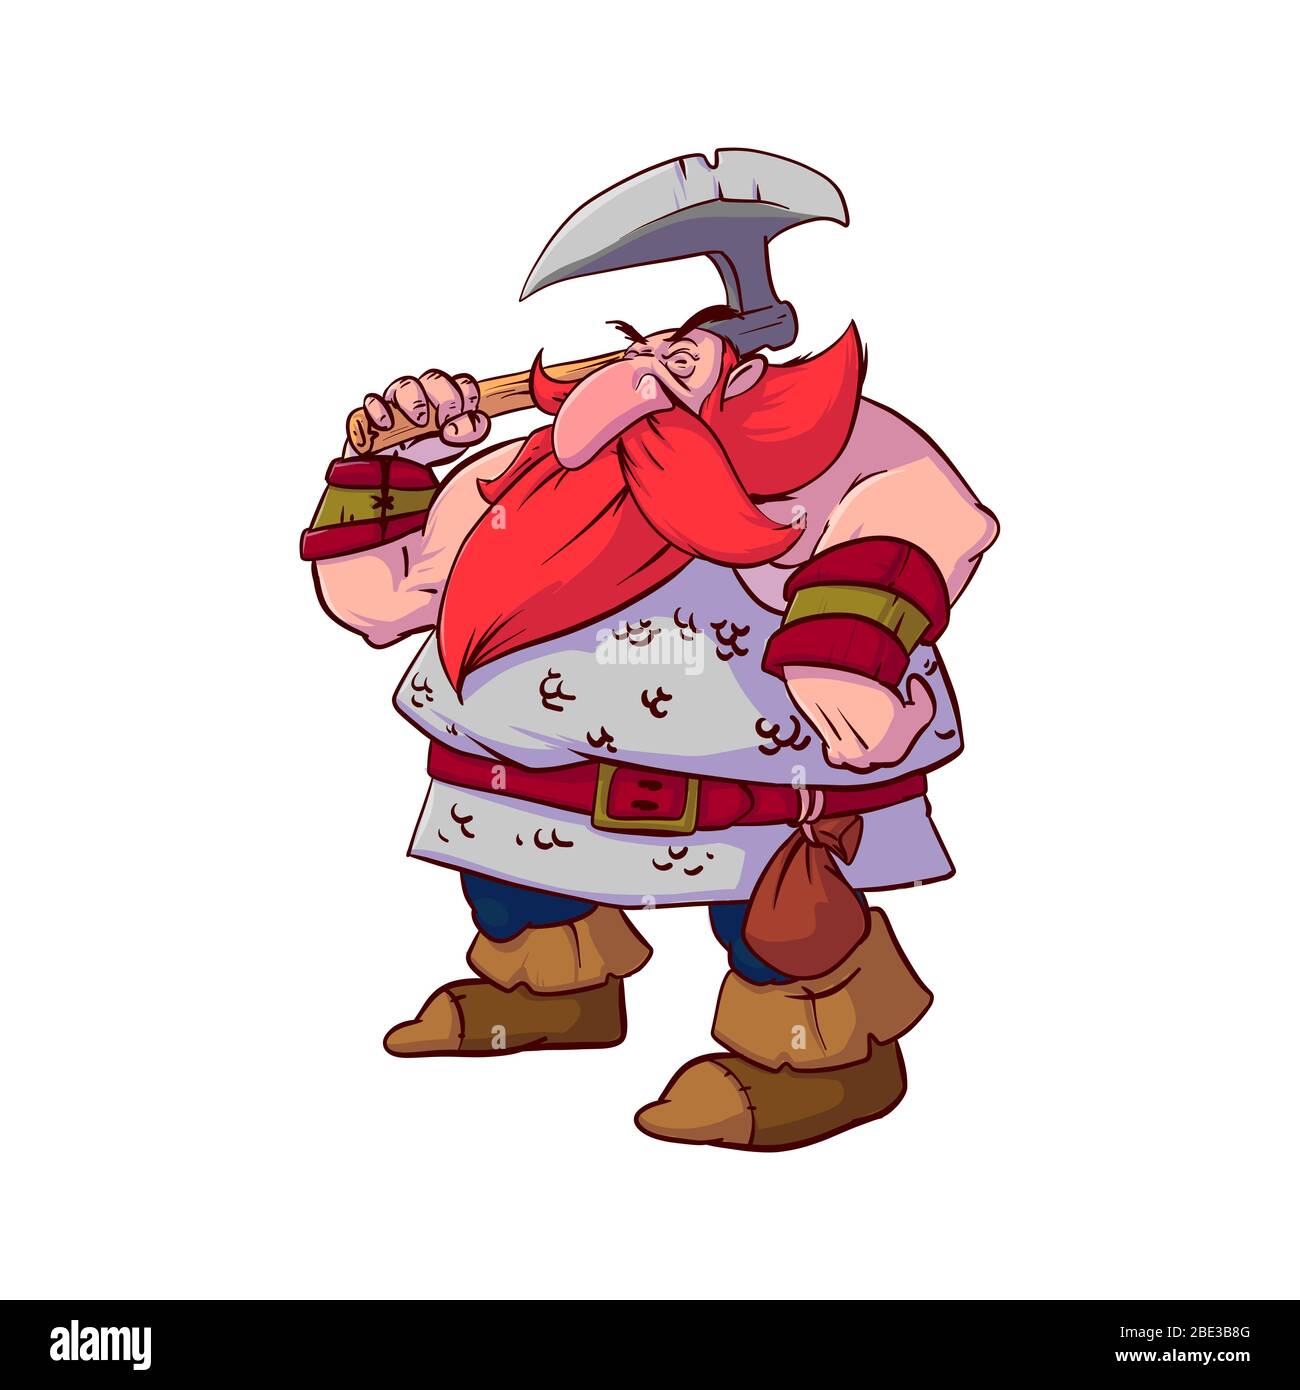 Colorful vector illustration of a cartoon dwarf warrior, with red hair and beard, wearing a chain armor, armed with giant battle axe. Stock Vector